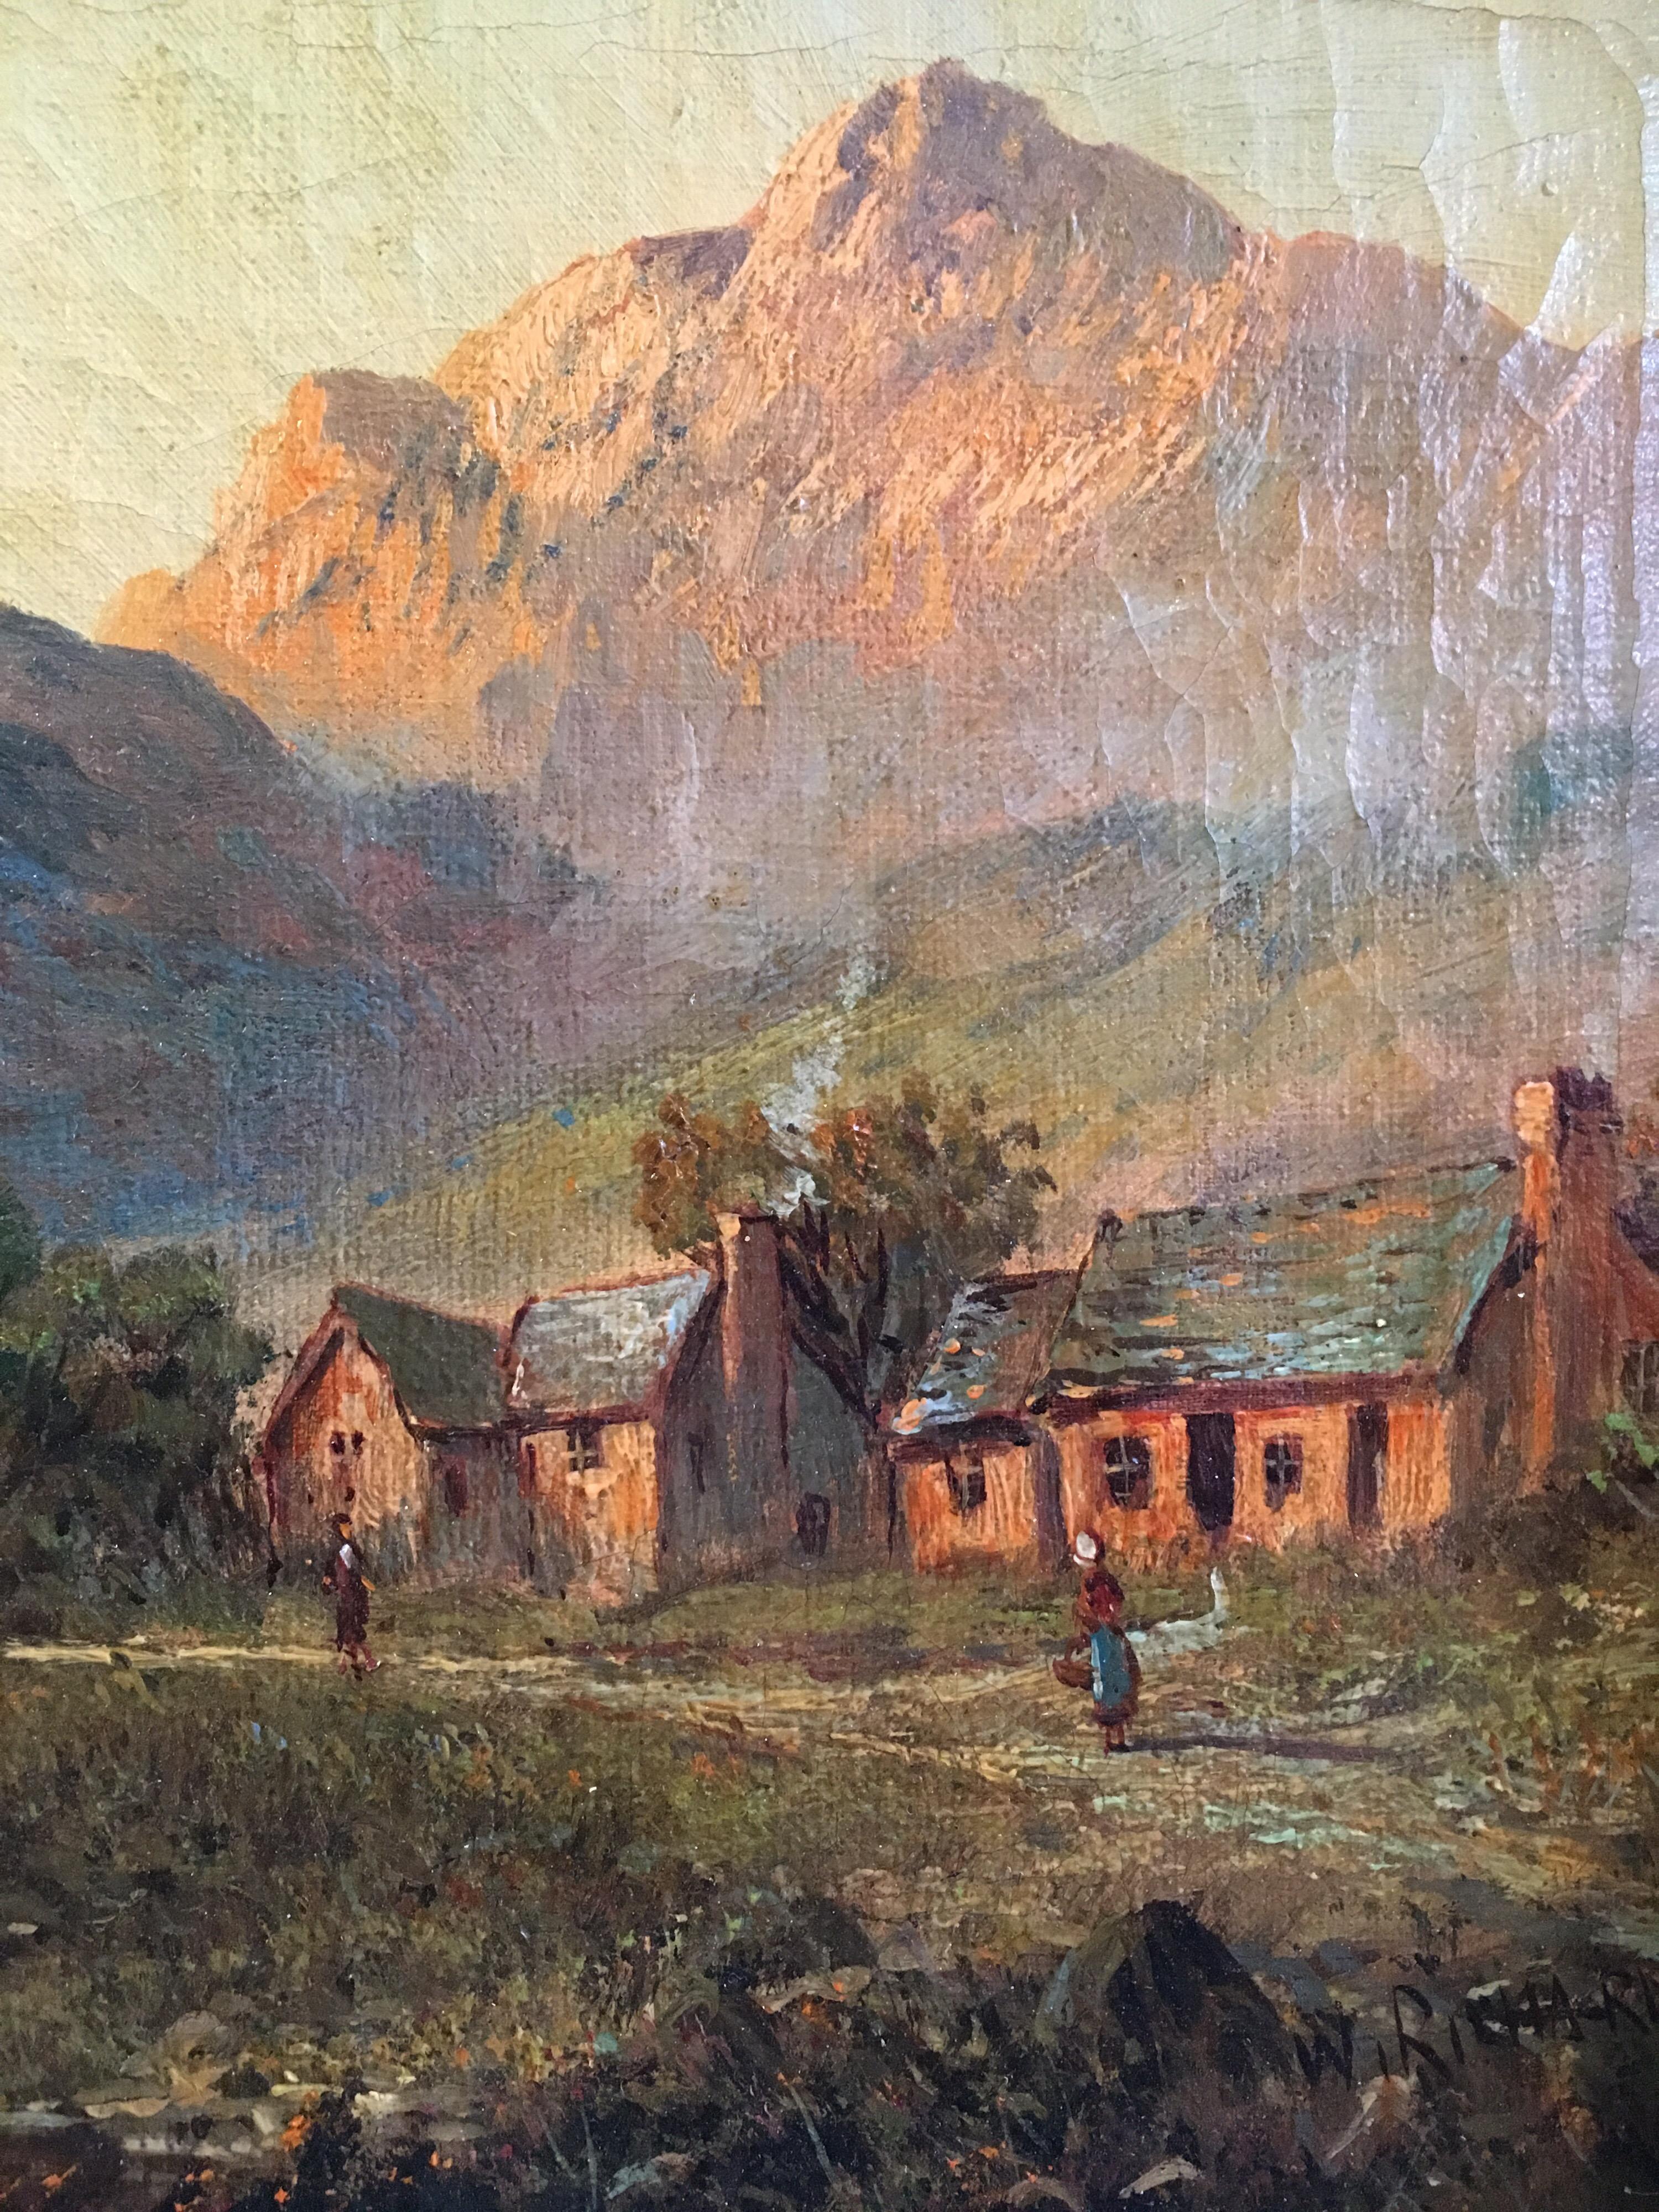 Glen Ogle, Lochearnhead, Antique Scottish Oil Painting Sunset, Signed
by F. E. Jamieson (British 1895-1950)
signed, lower corner right hand corner, titled verso
oil painting on canvas, framed
Framed: 14.5 x 22.5 inches

Fine quality antique oil